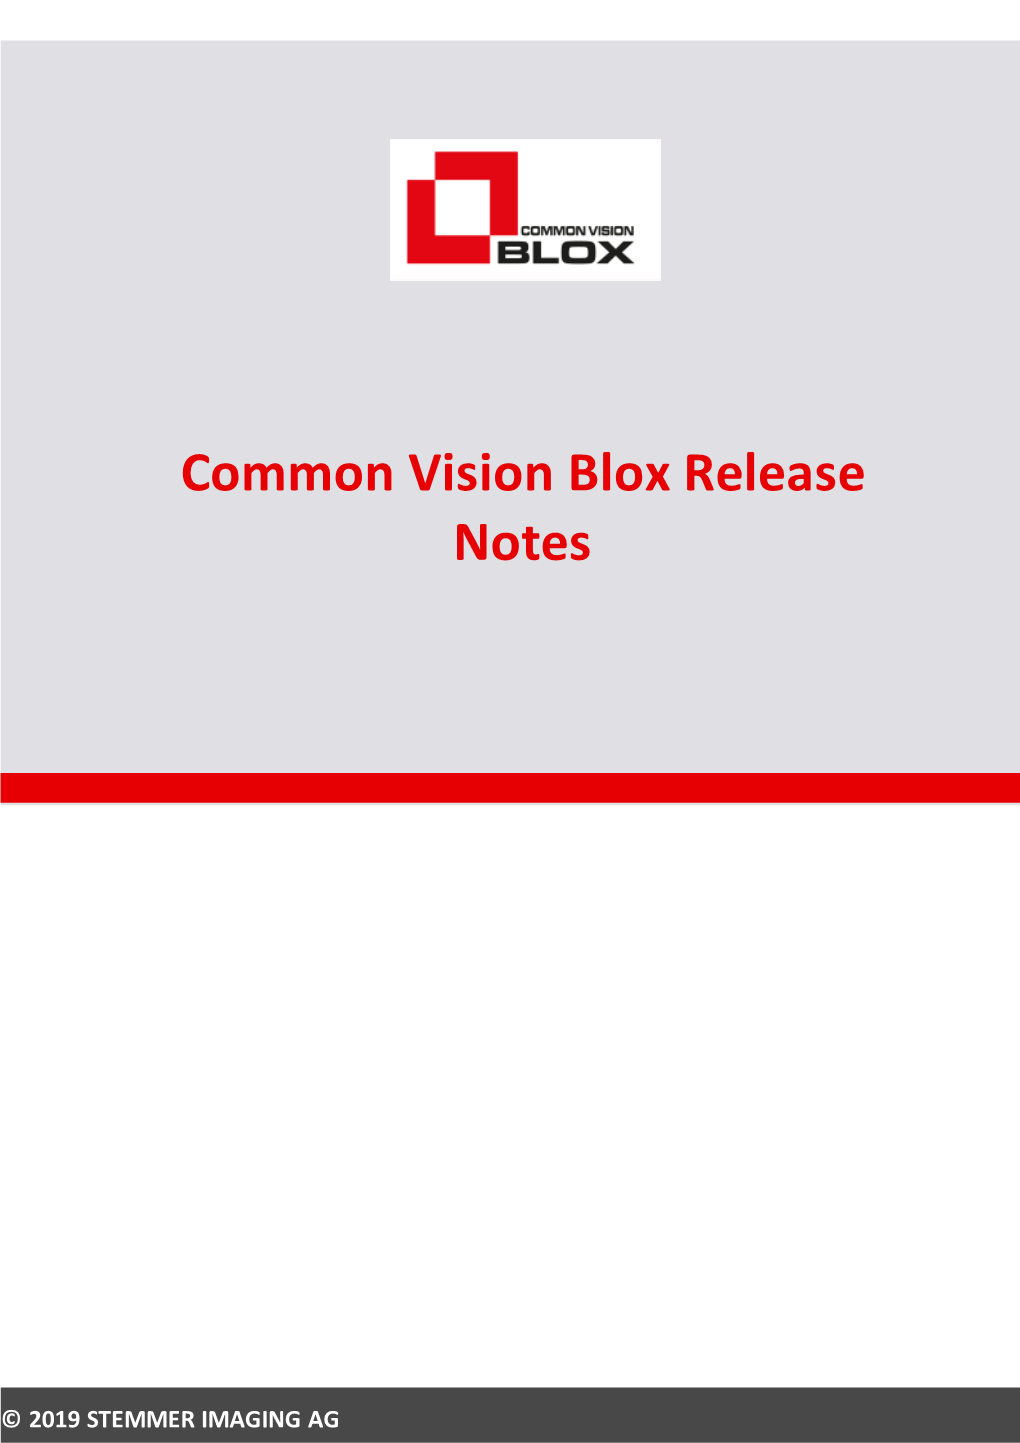 Common Vision Blox Release Notes